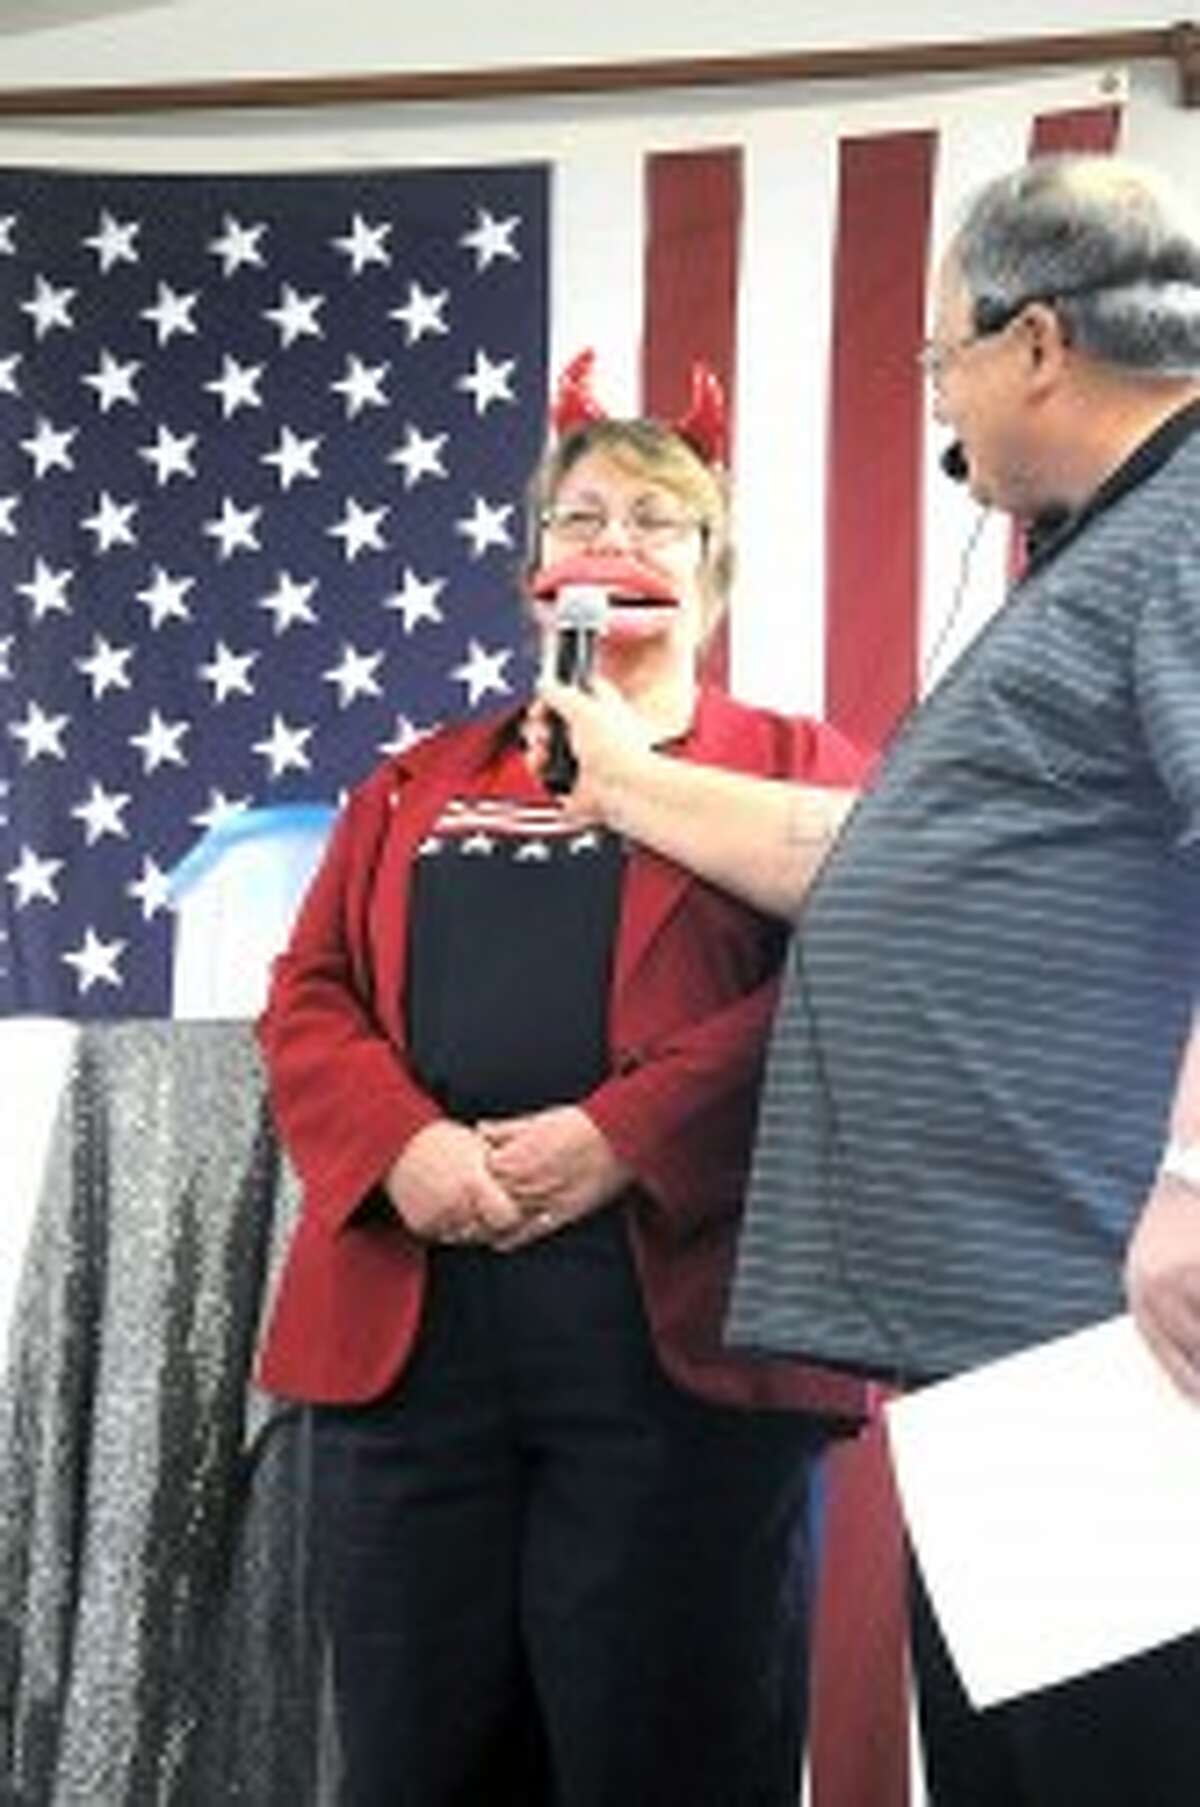 PUTTING ON A SHOW: Mecosta County Commission on Aging Director Claudia Lenon performed with her husband, ventriloquist Gary Lenon, at the Senior Center’s annual Veterans Day Program last year. (Pioneer file photos)